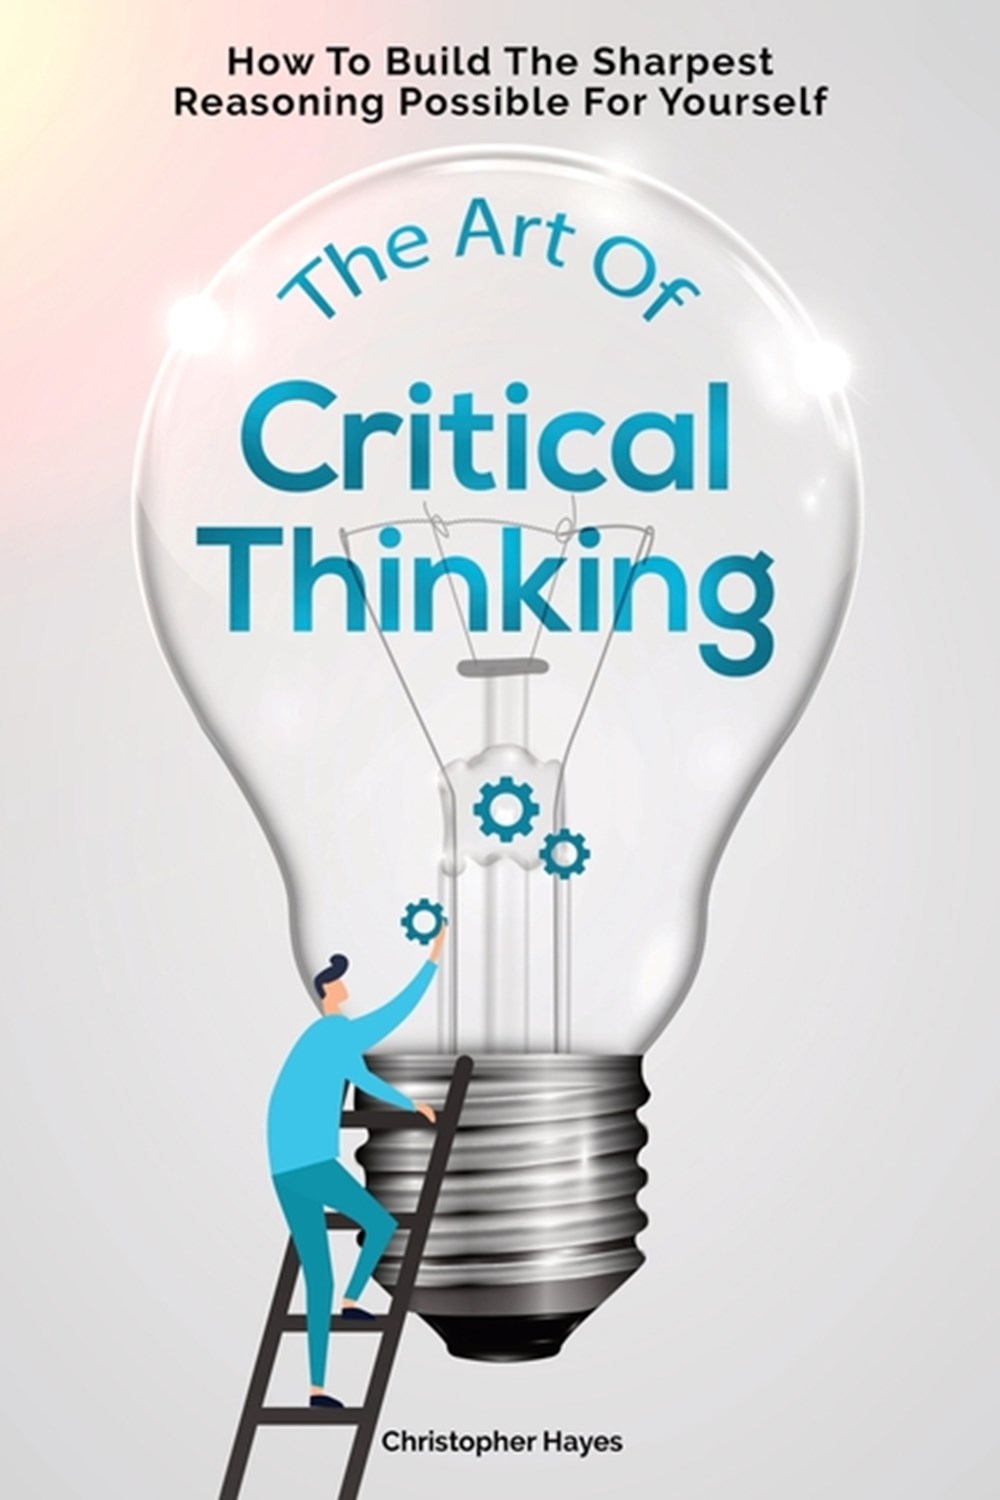 Art Of Critical Thinking: How To Build The Sharpest Reasoning Possible For Yourself